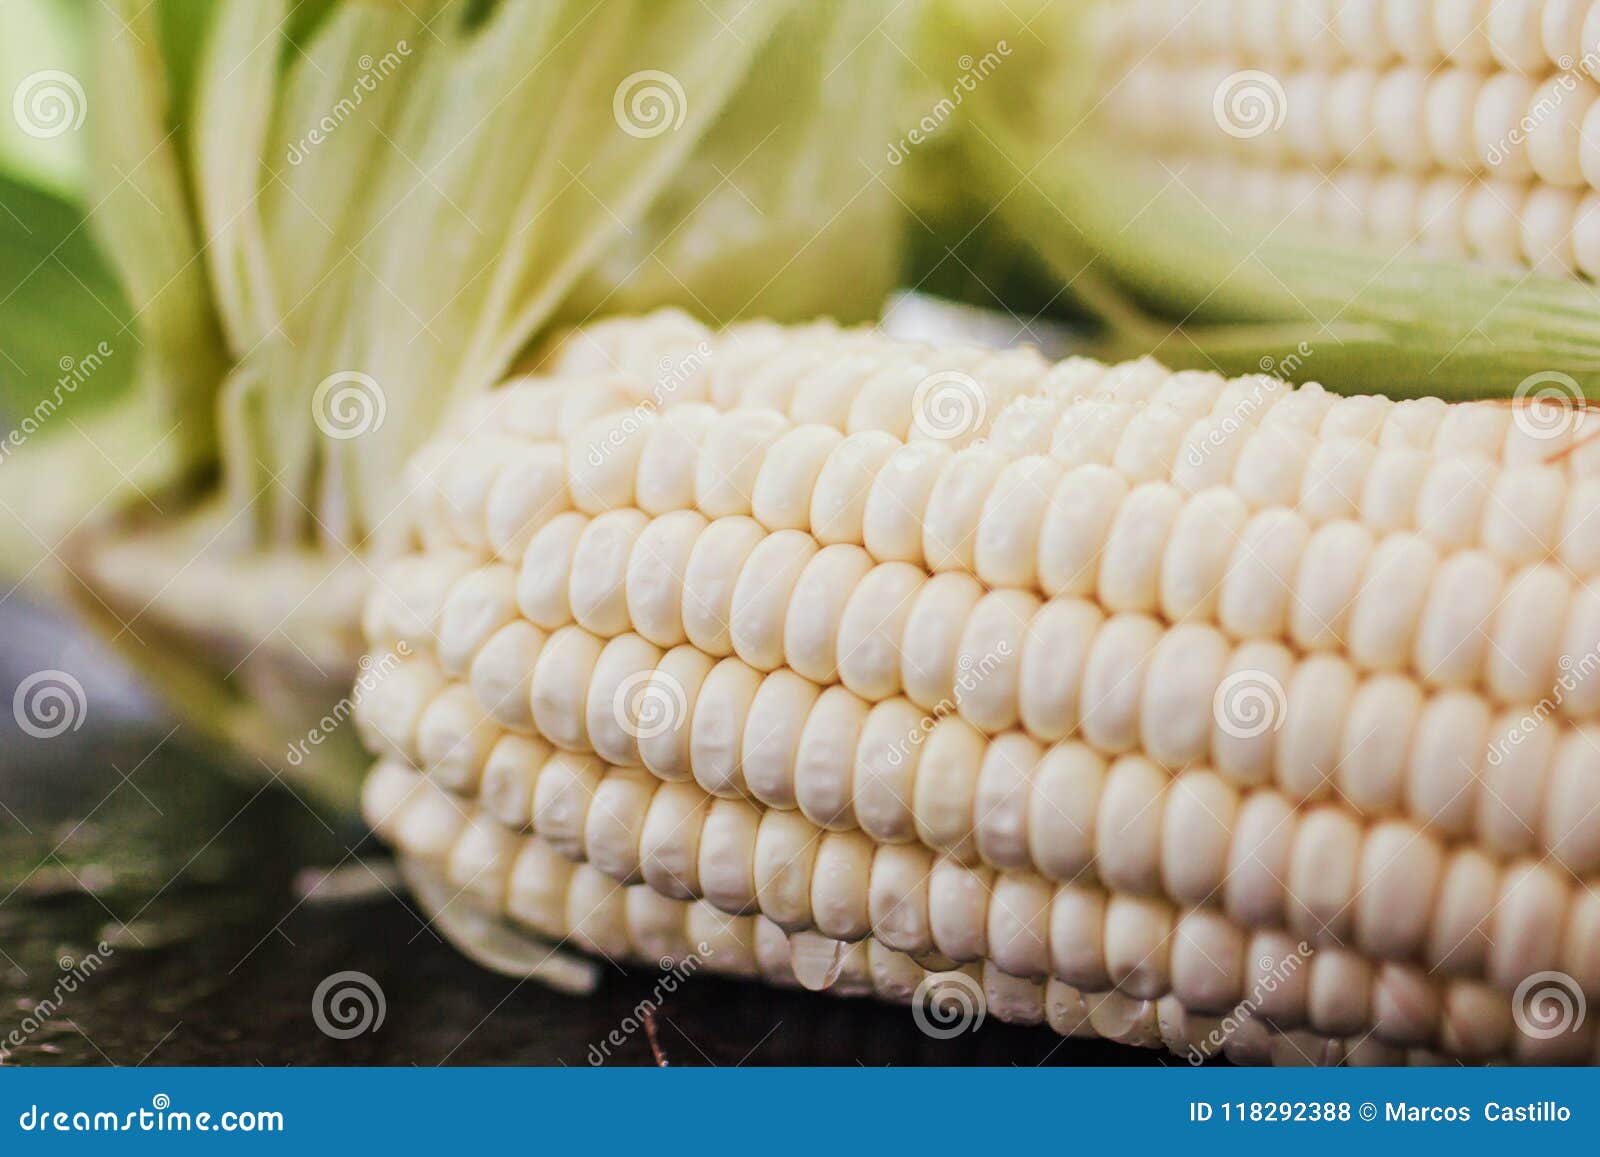 peeled corn, elote maiz mexican food in mexico